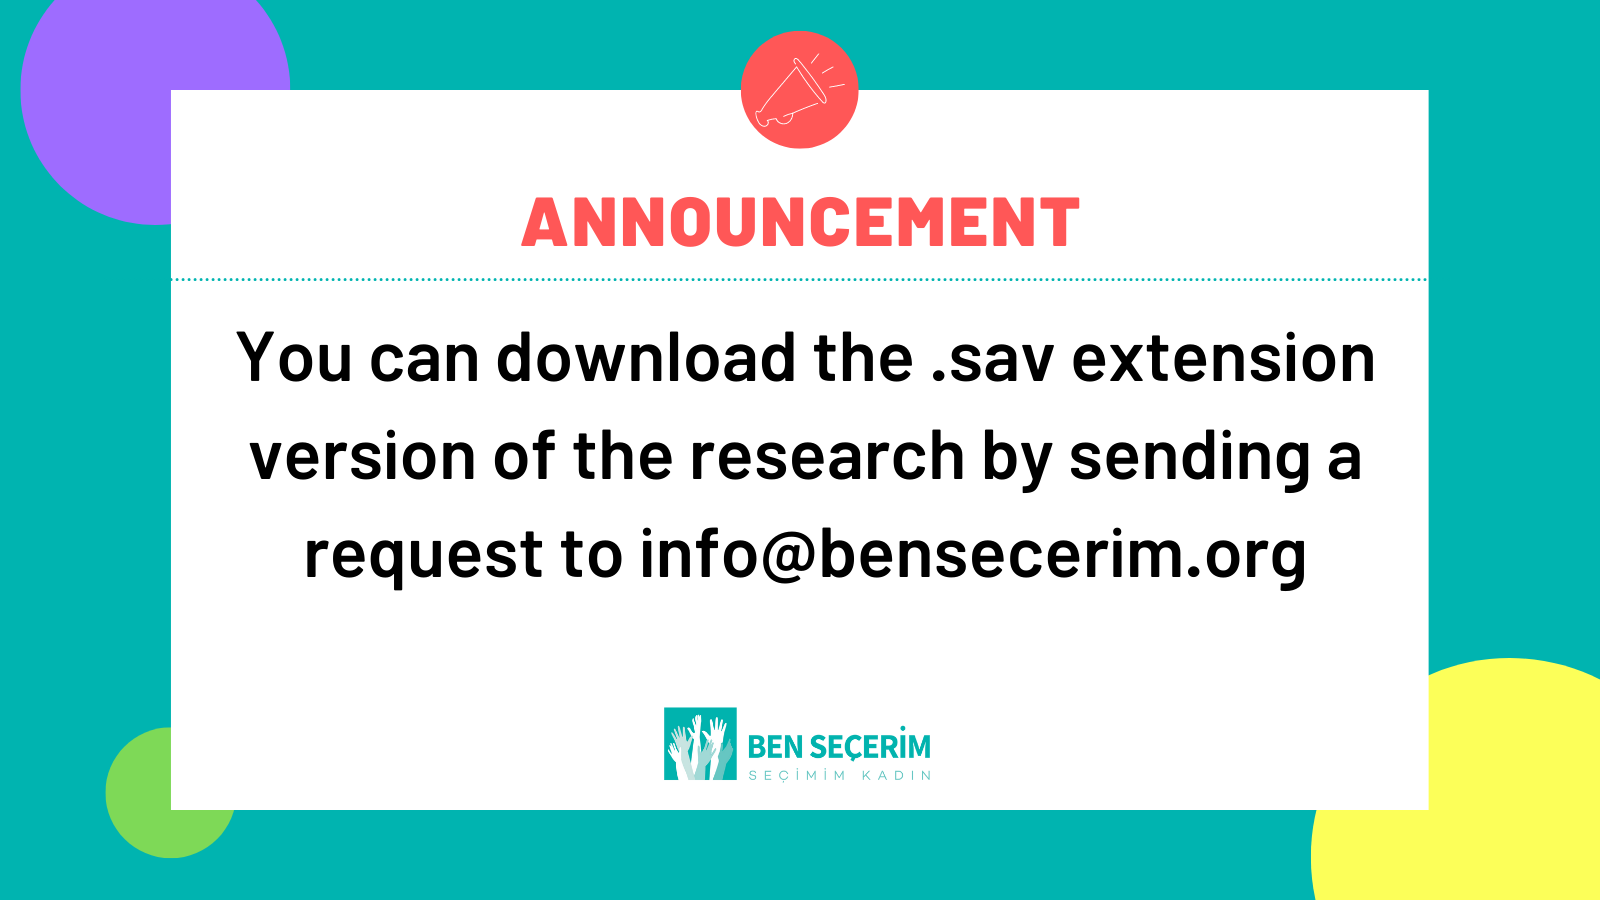 You can contact us for the .sav extension data set of our research.